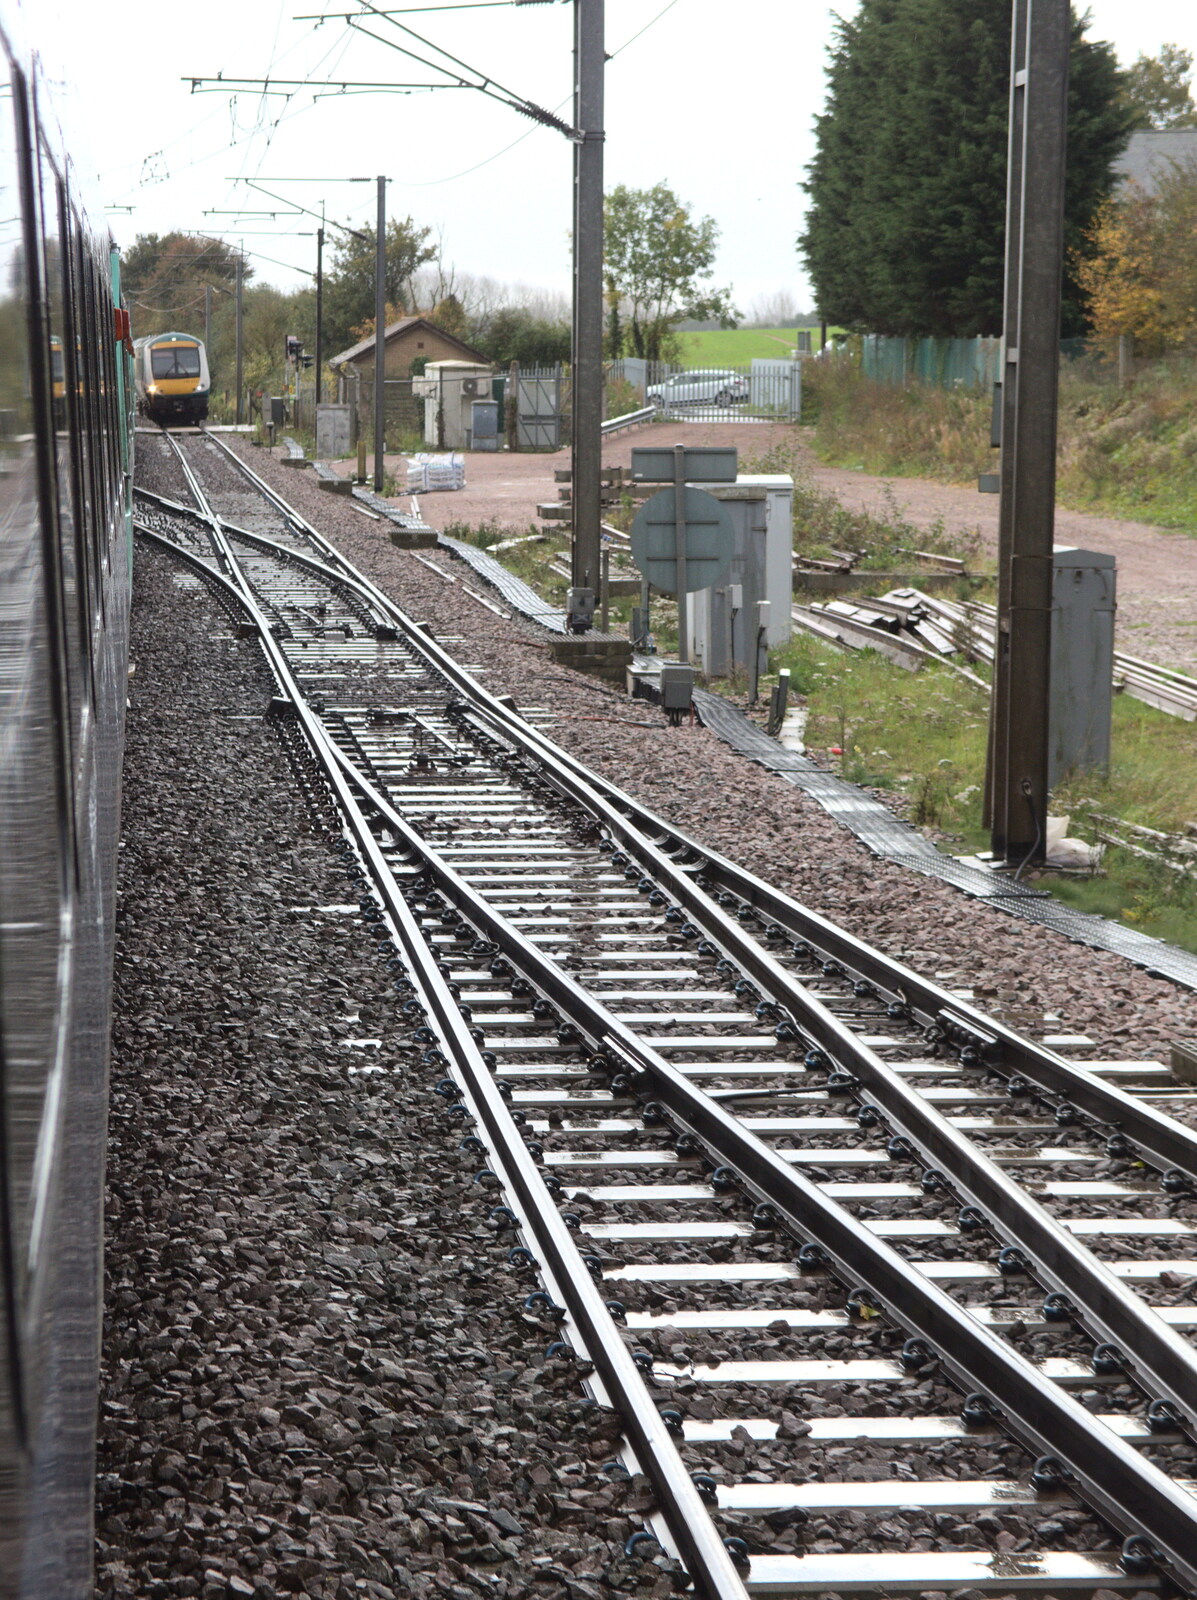 Another set of points on Haughley Junction from (Very) Long Train (Not) Running, Stowmarket, Suffolk - 21st October 2014